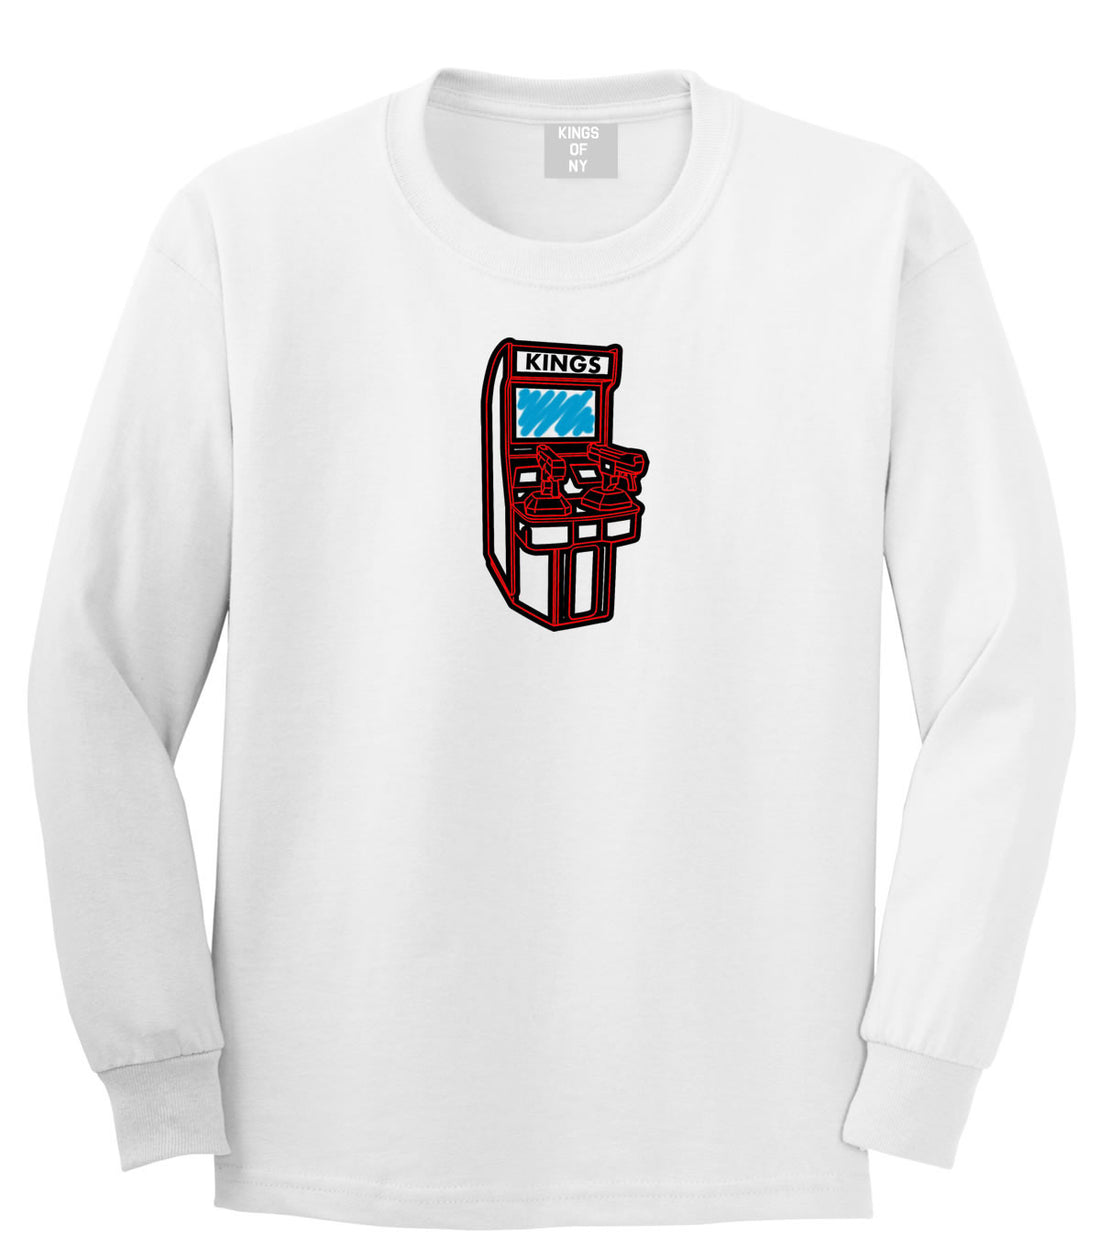 Arcade Game Gamer Long Sleeve T-Shirt in White By Kings Of NY